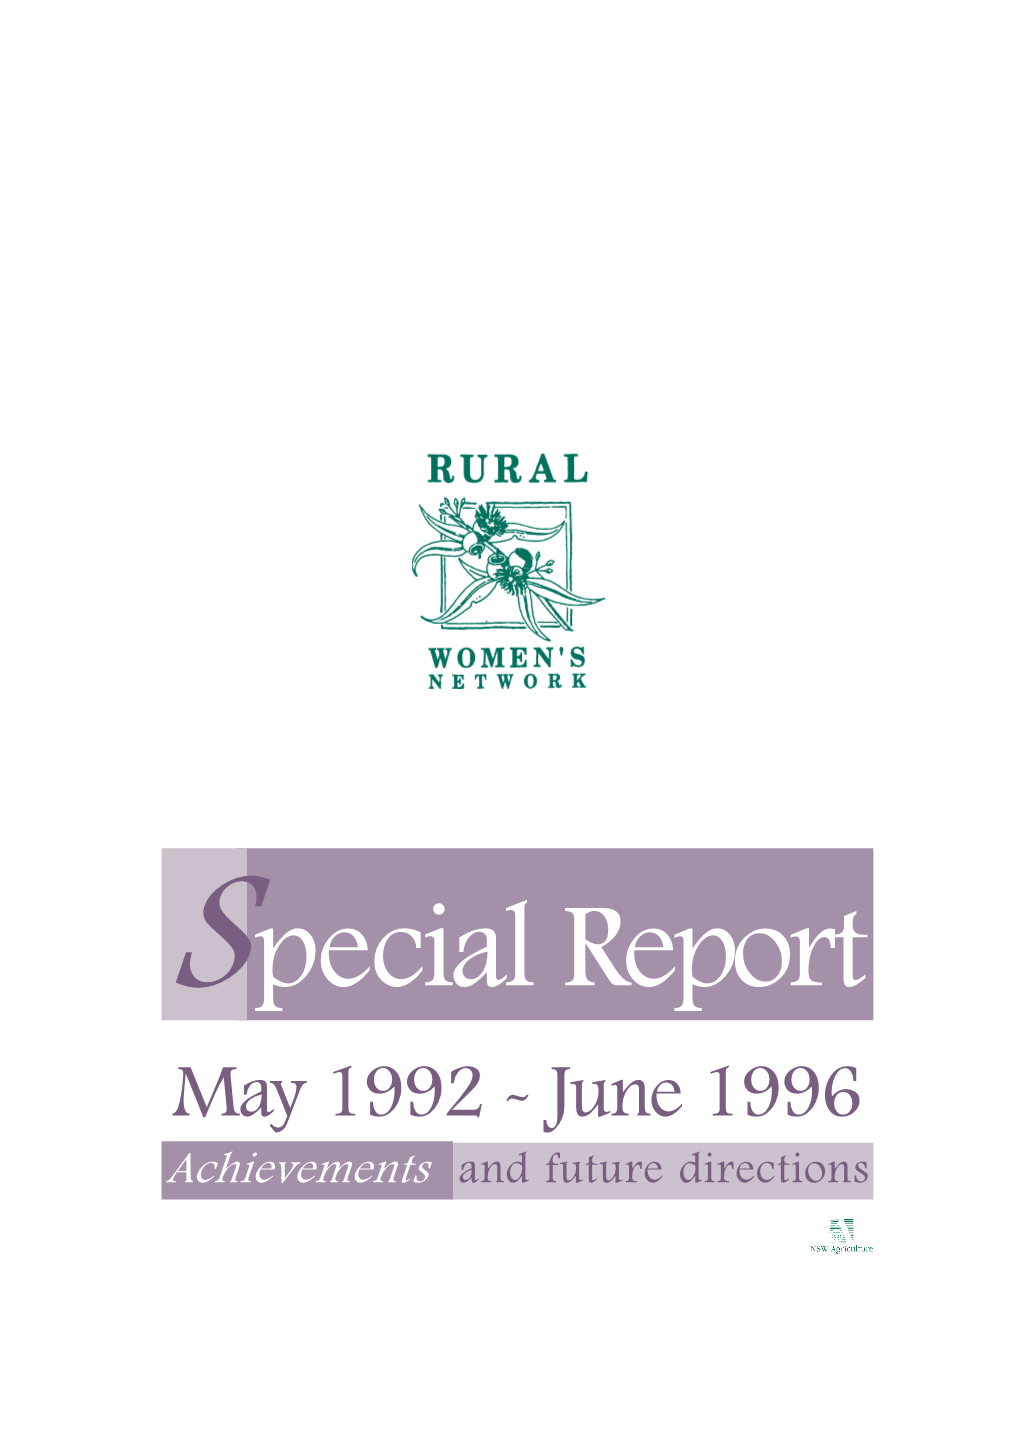 Rural Women's Network Special Report May 1992 to June 1996